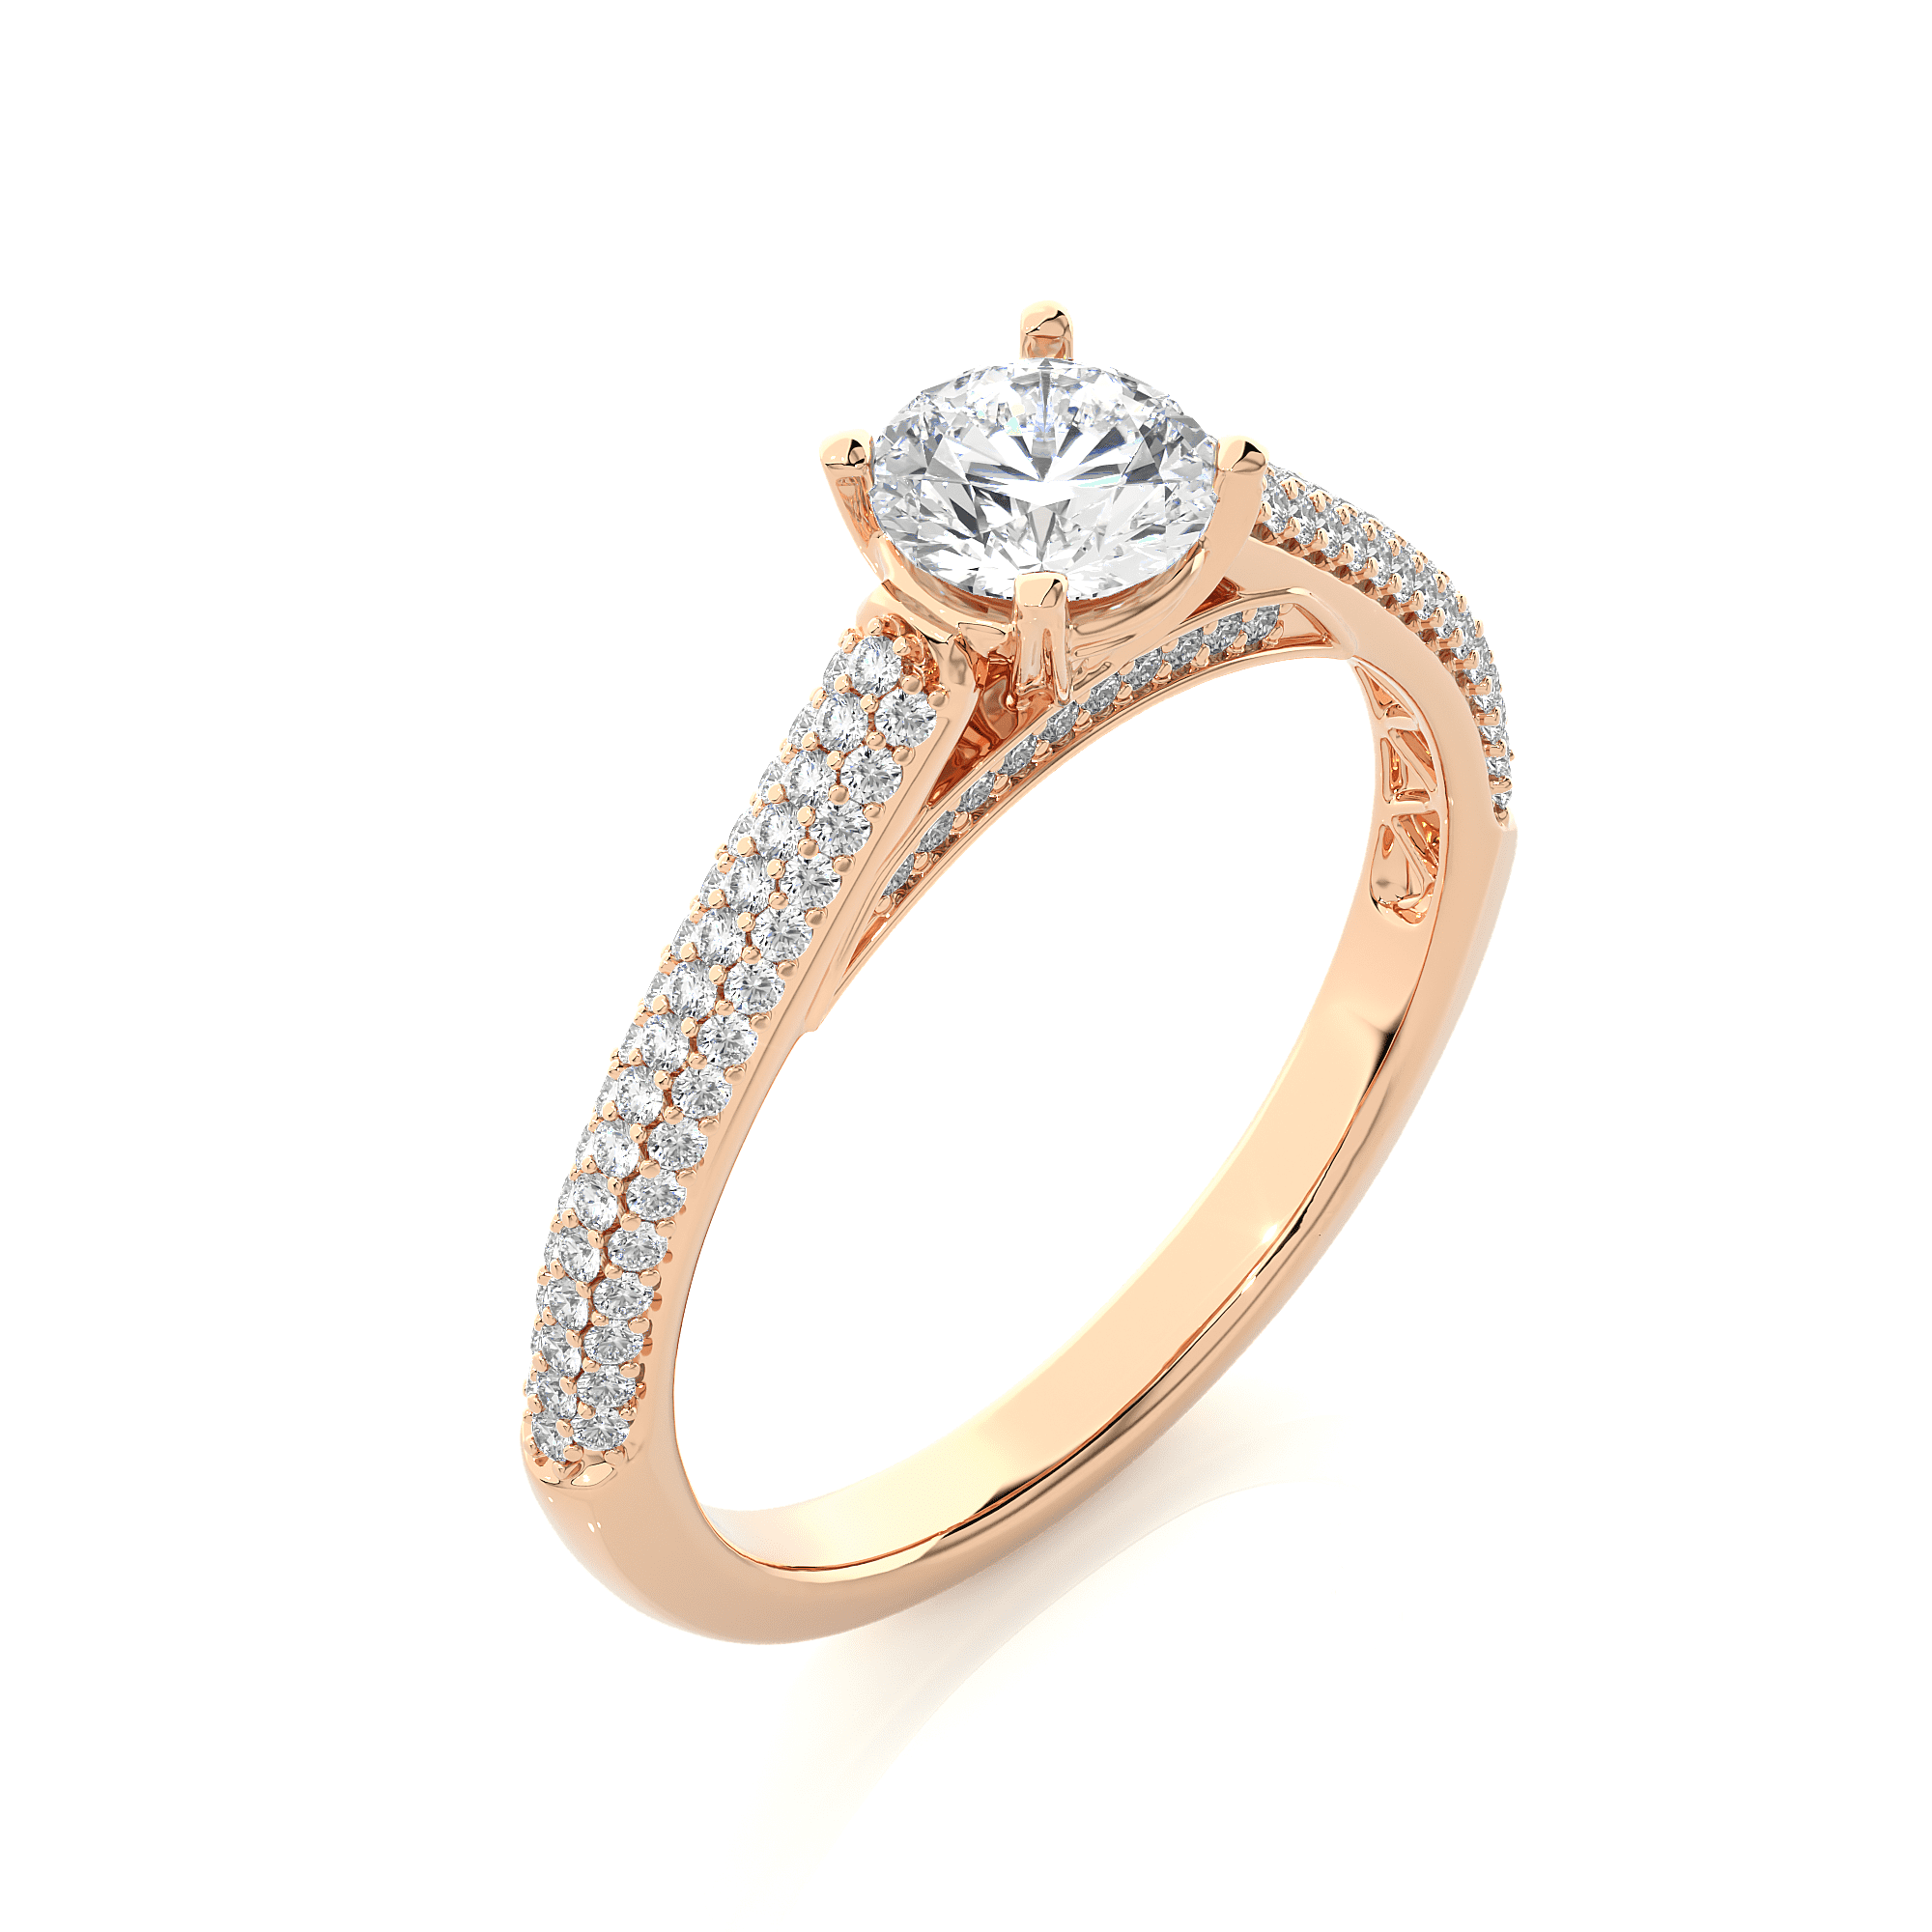 17 Engagement Ring Settings & Styles to Follow